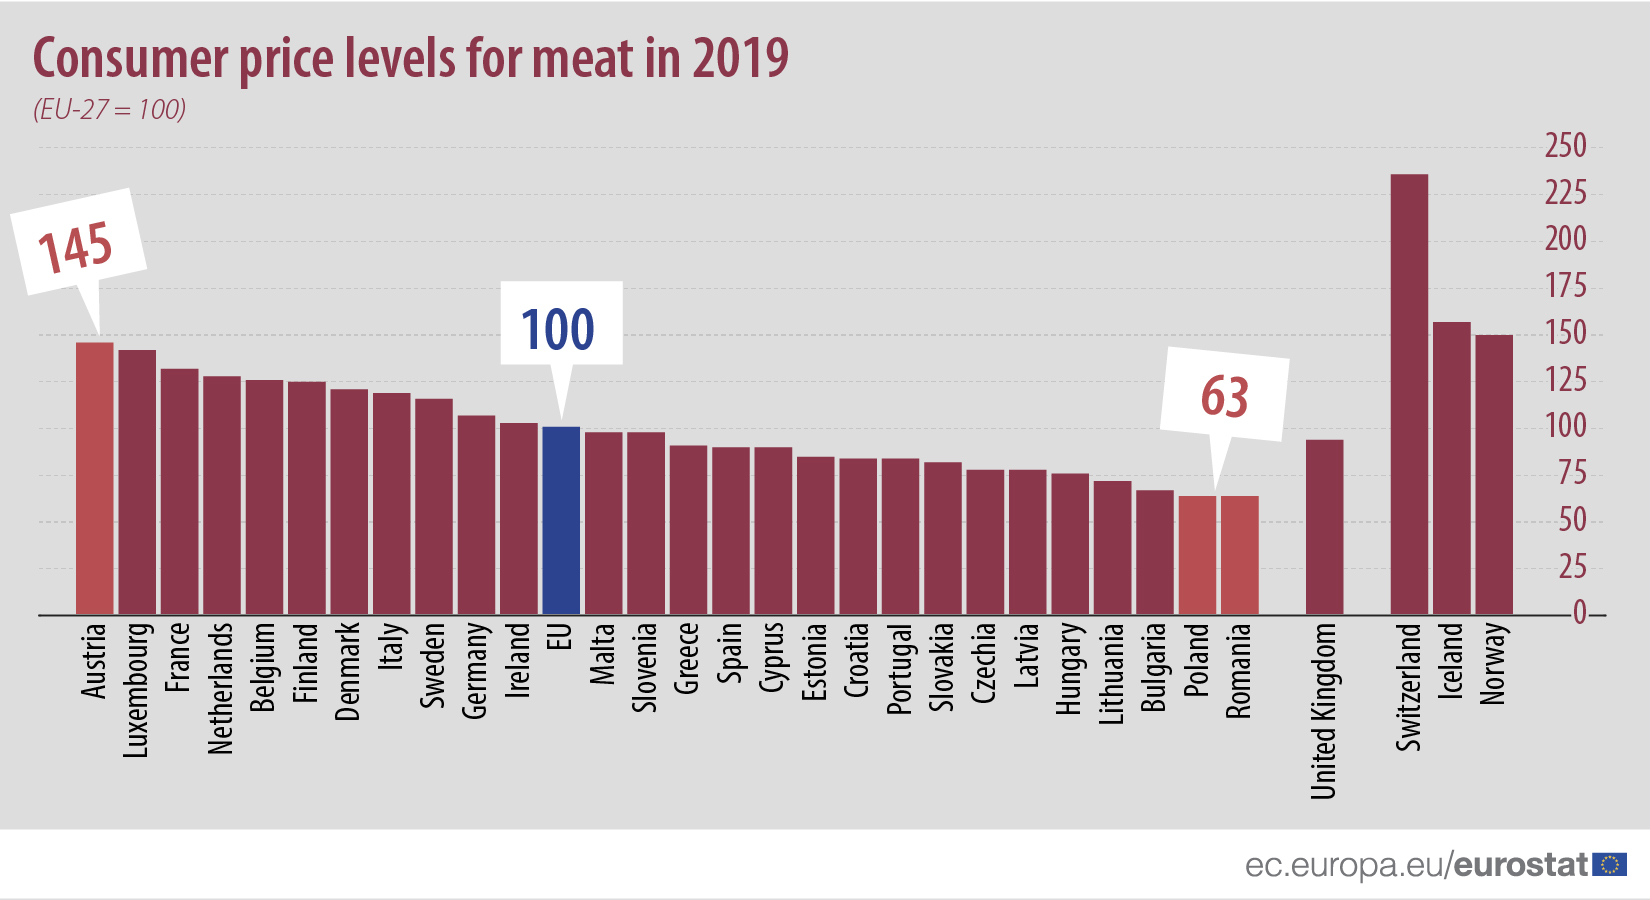 Consumer price levels for meat in 2019, EU27 = 100